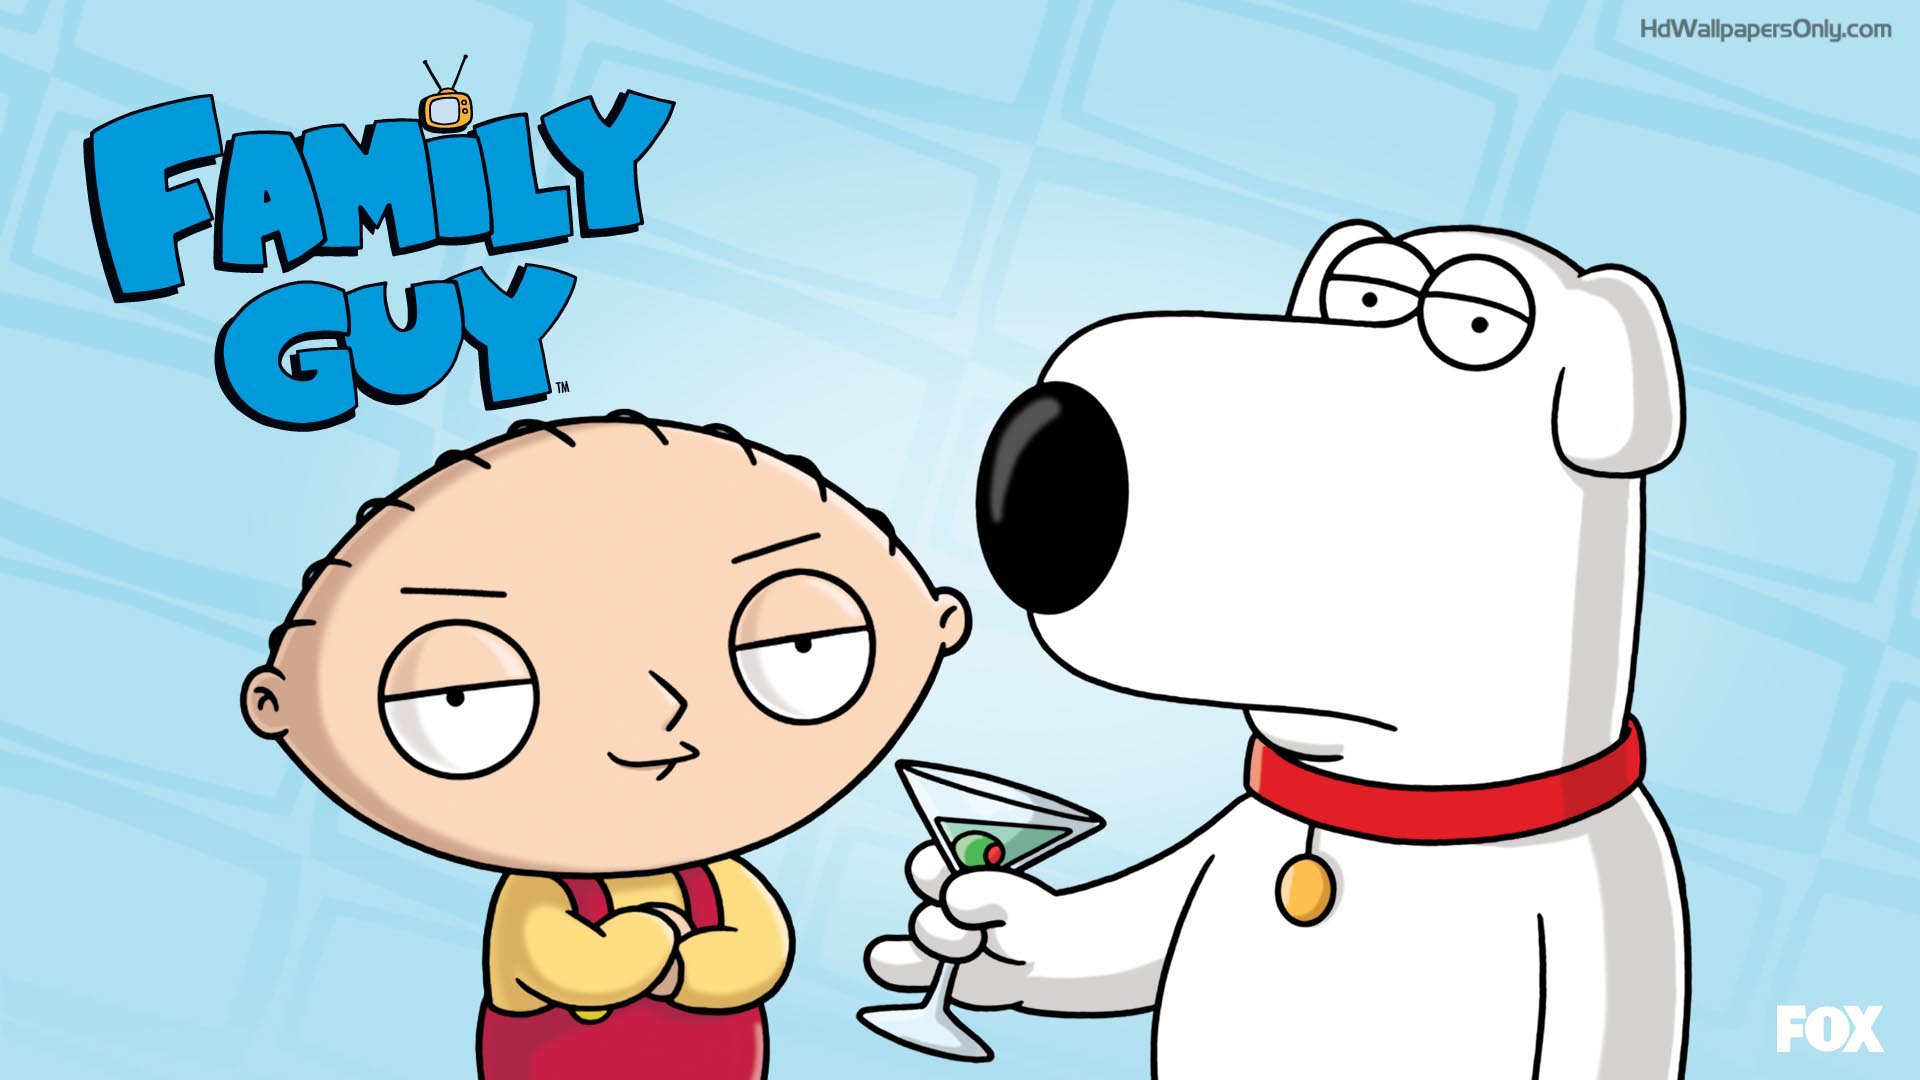 Funny Family Guy Wallpaper HD Background Screensavers